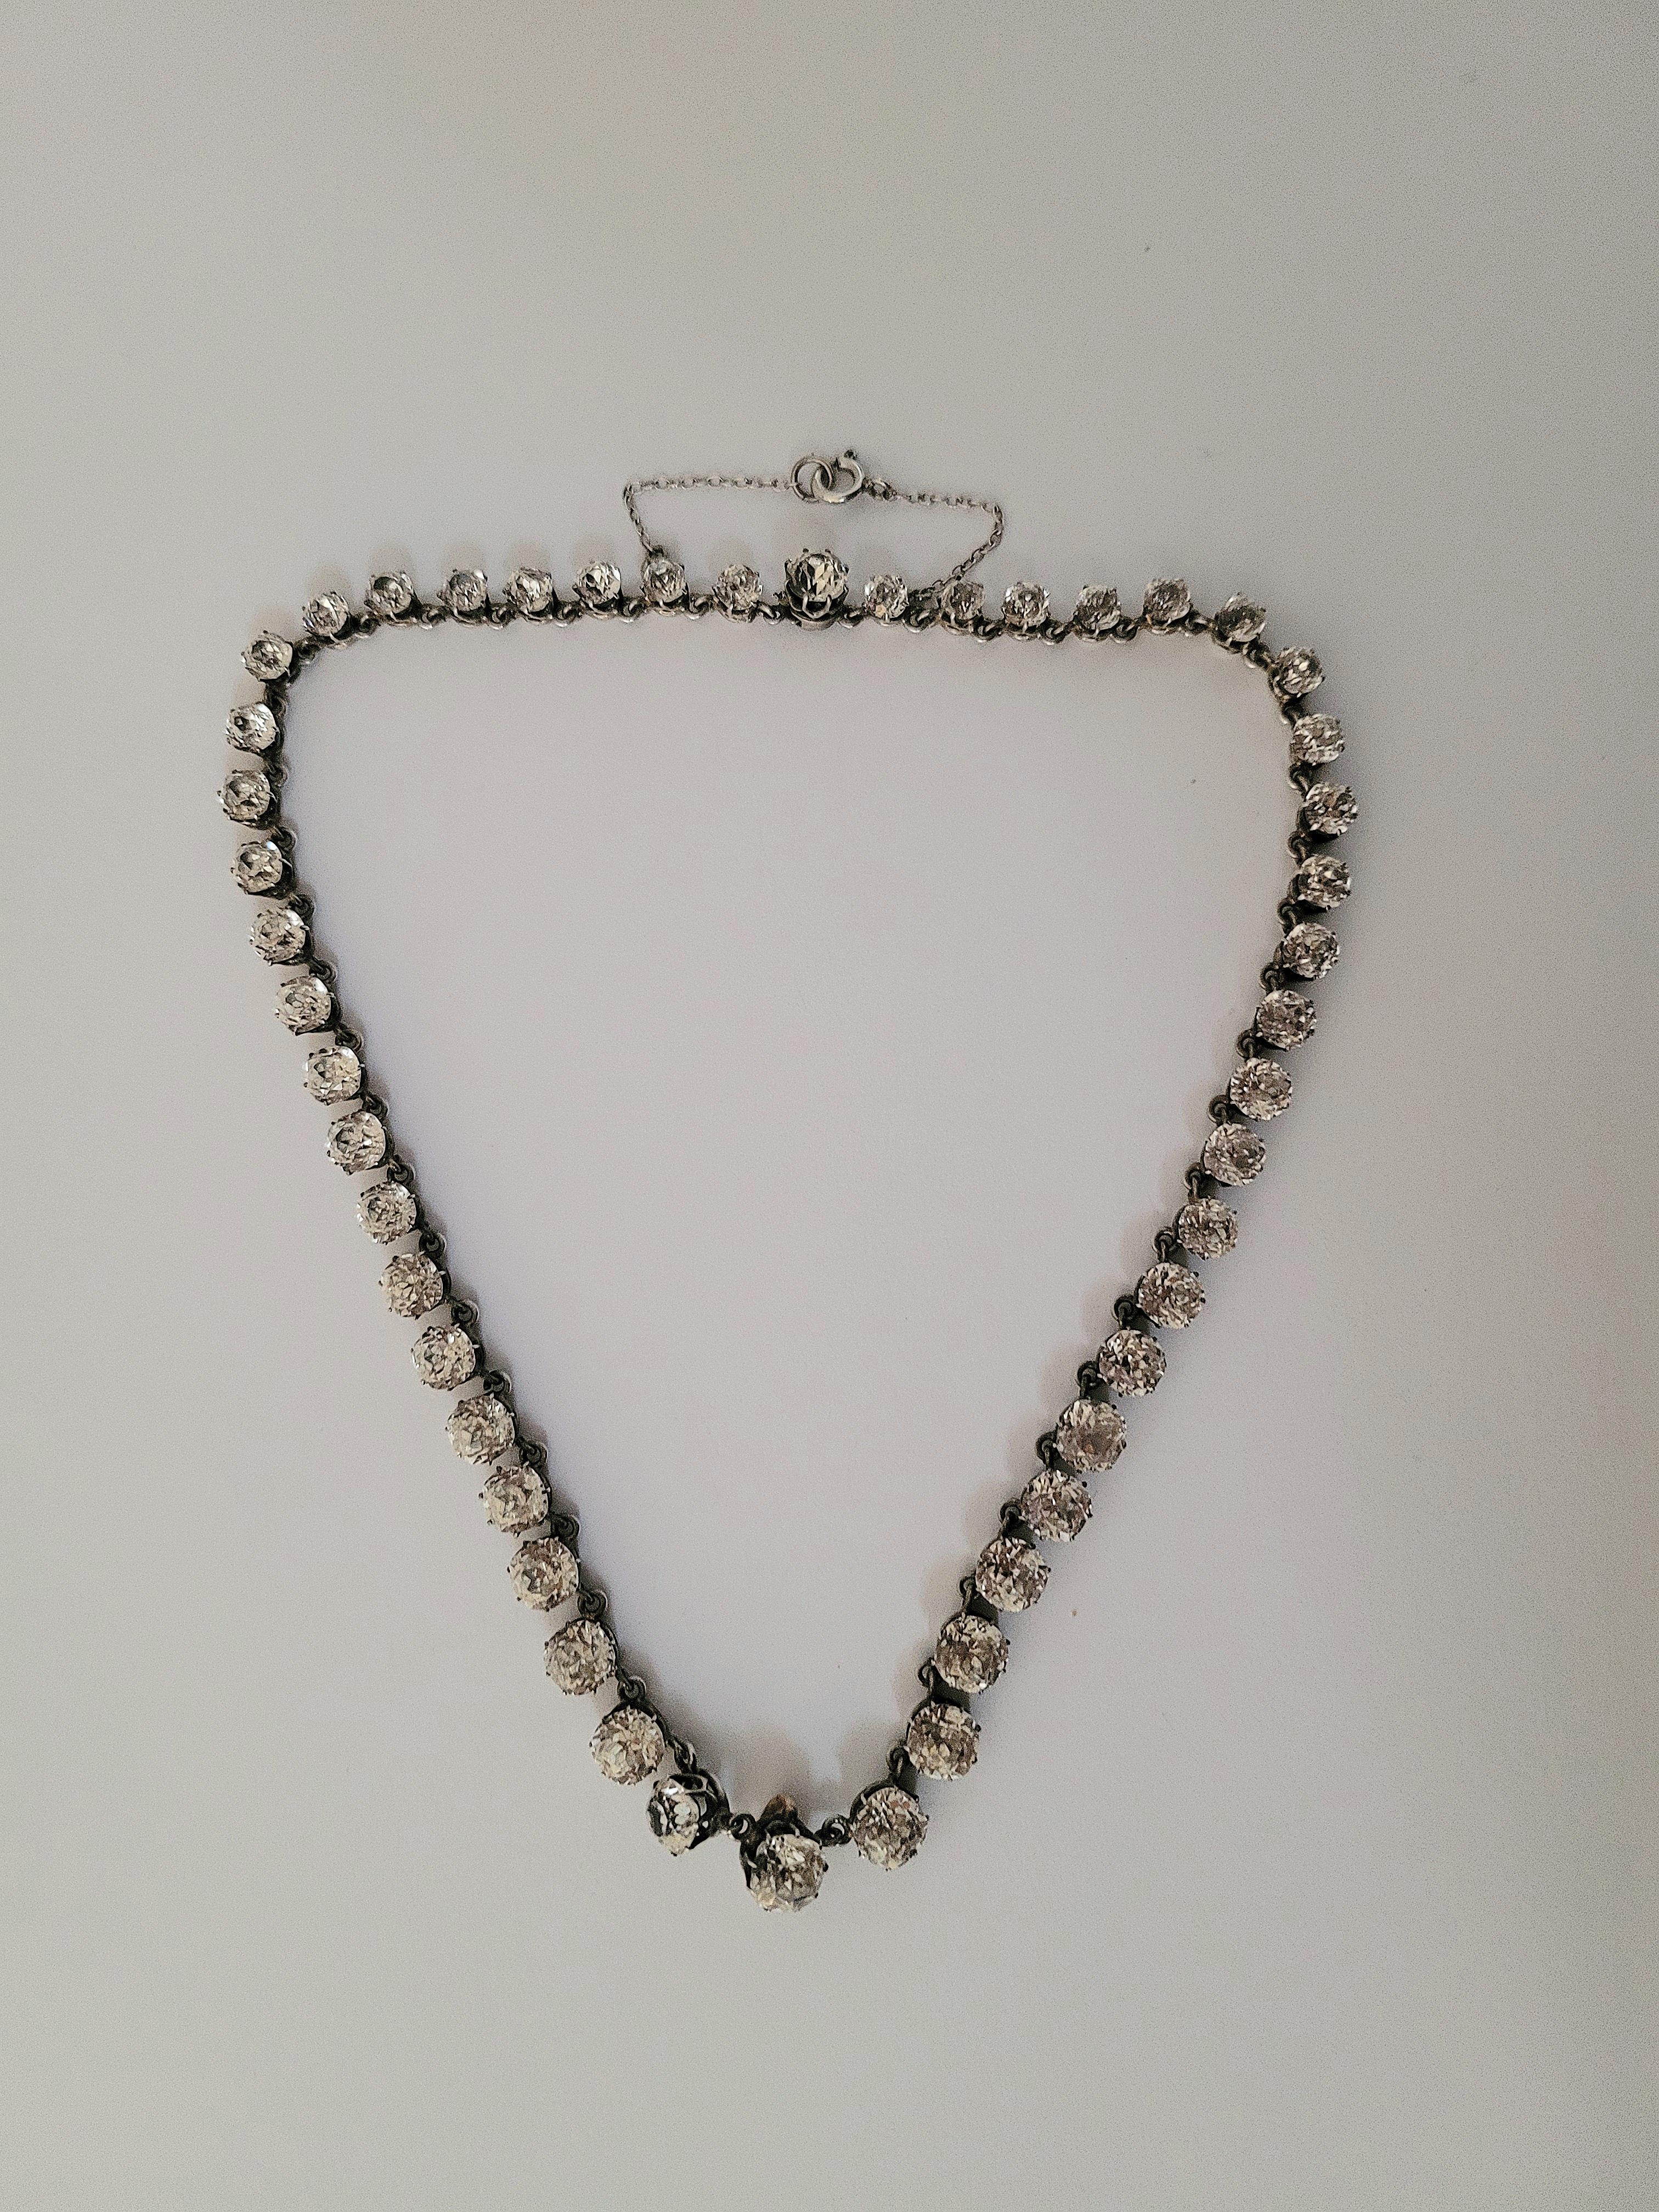 This exquisite Victorian c.1800s Silver and Cushion Paste RIVIERE Necklace radiates timeless elegance. The meticulously crafted piece boasts a stunning array of paste stones, each enhanced by a silver-colored backing for added brilliance. Set in an